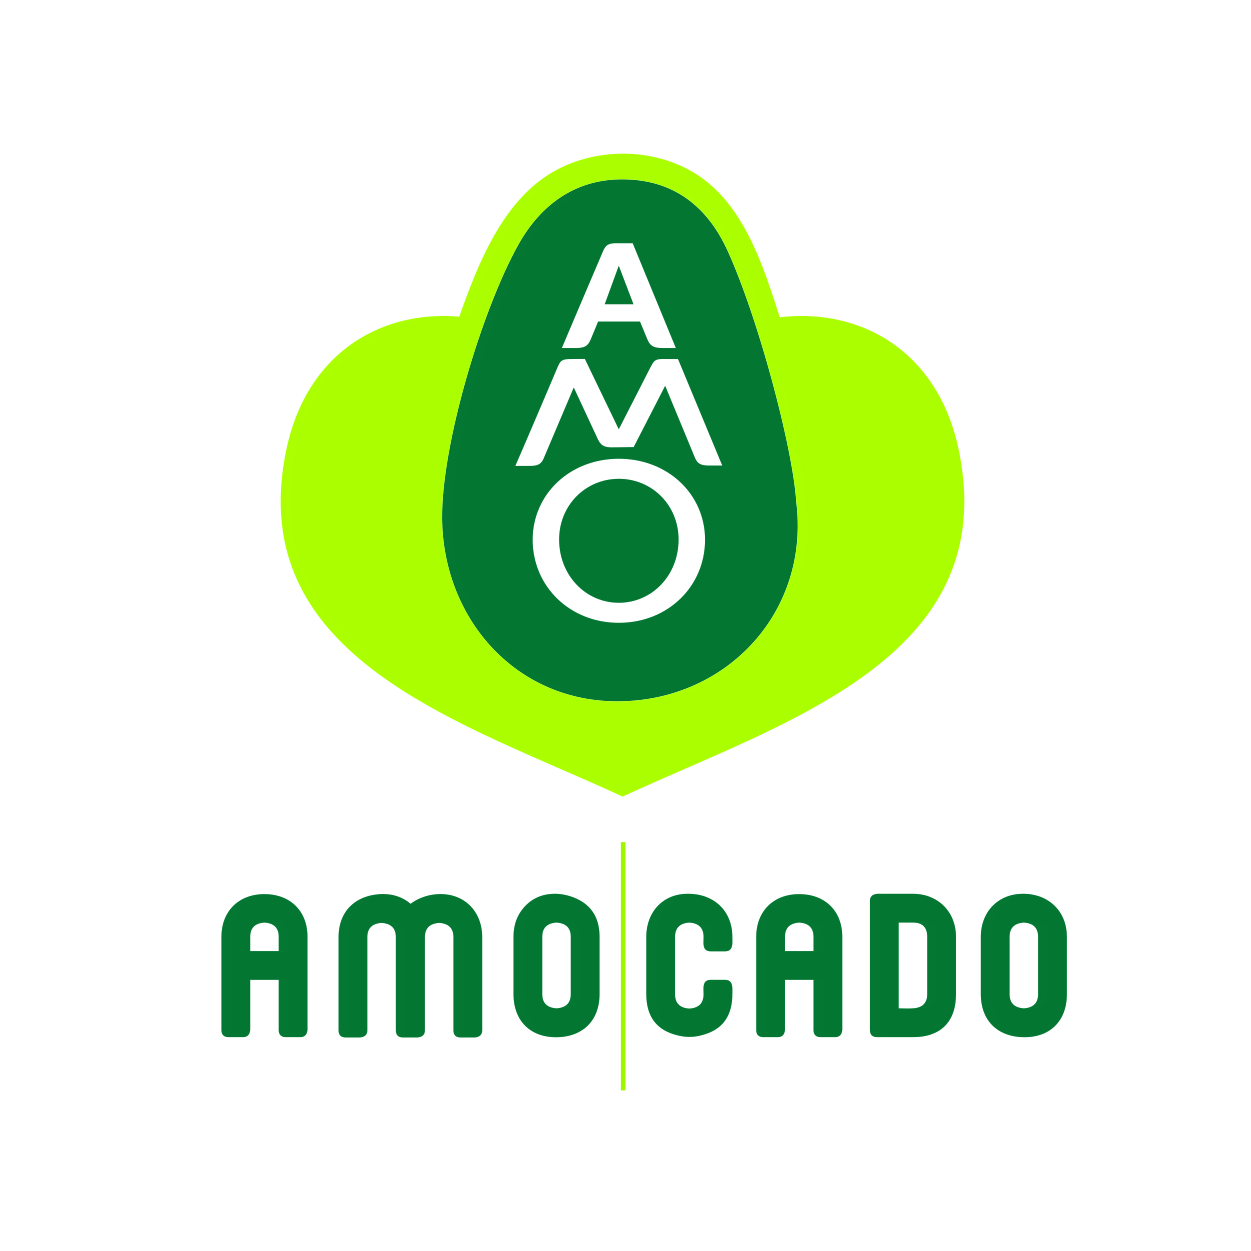 AMOCADO BRAND logo design by logo designer KENNETH DISENO for your inspiration and for the worlds largest logo competition